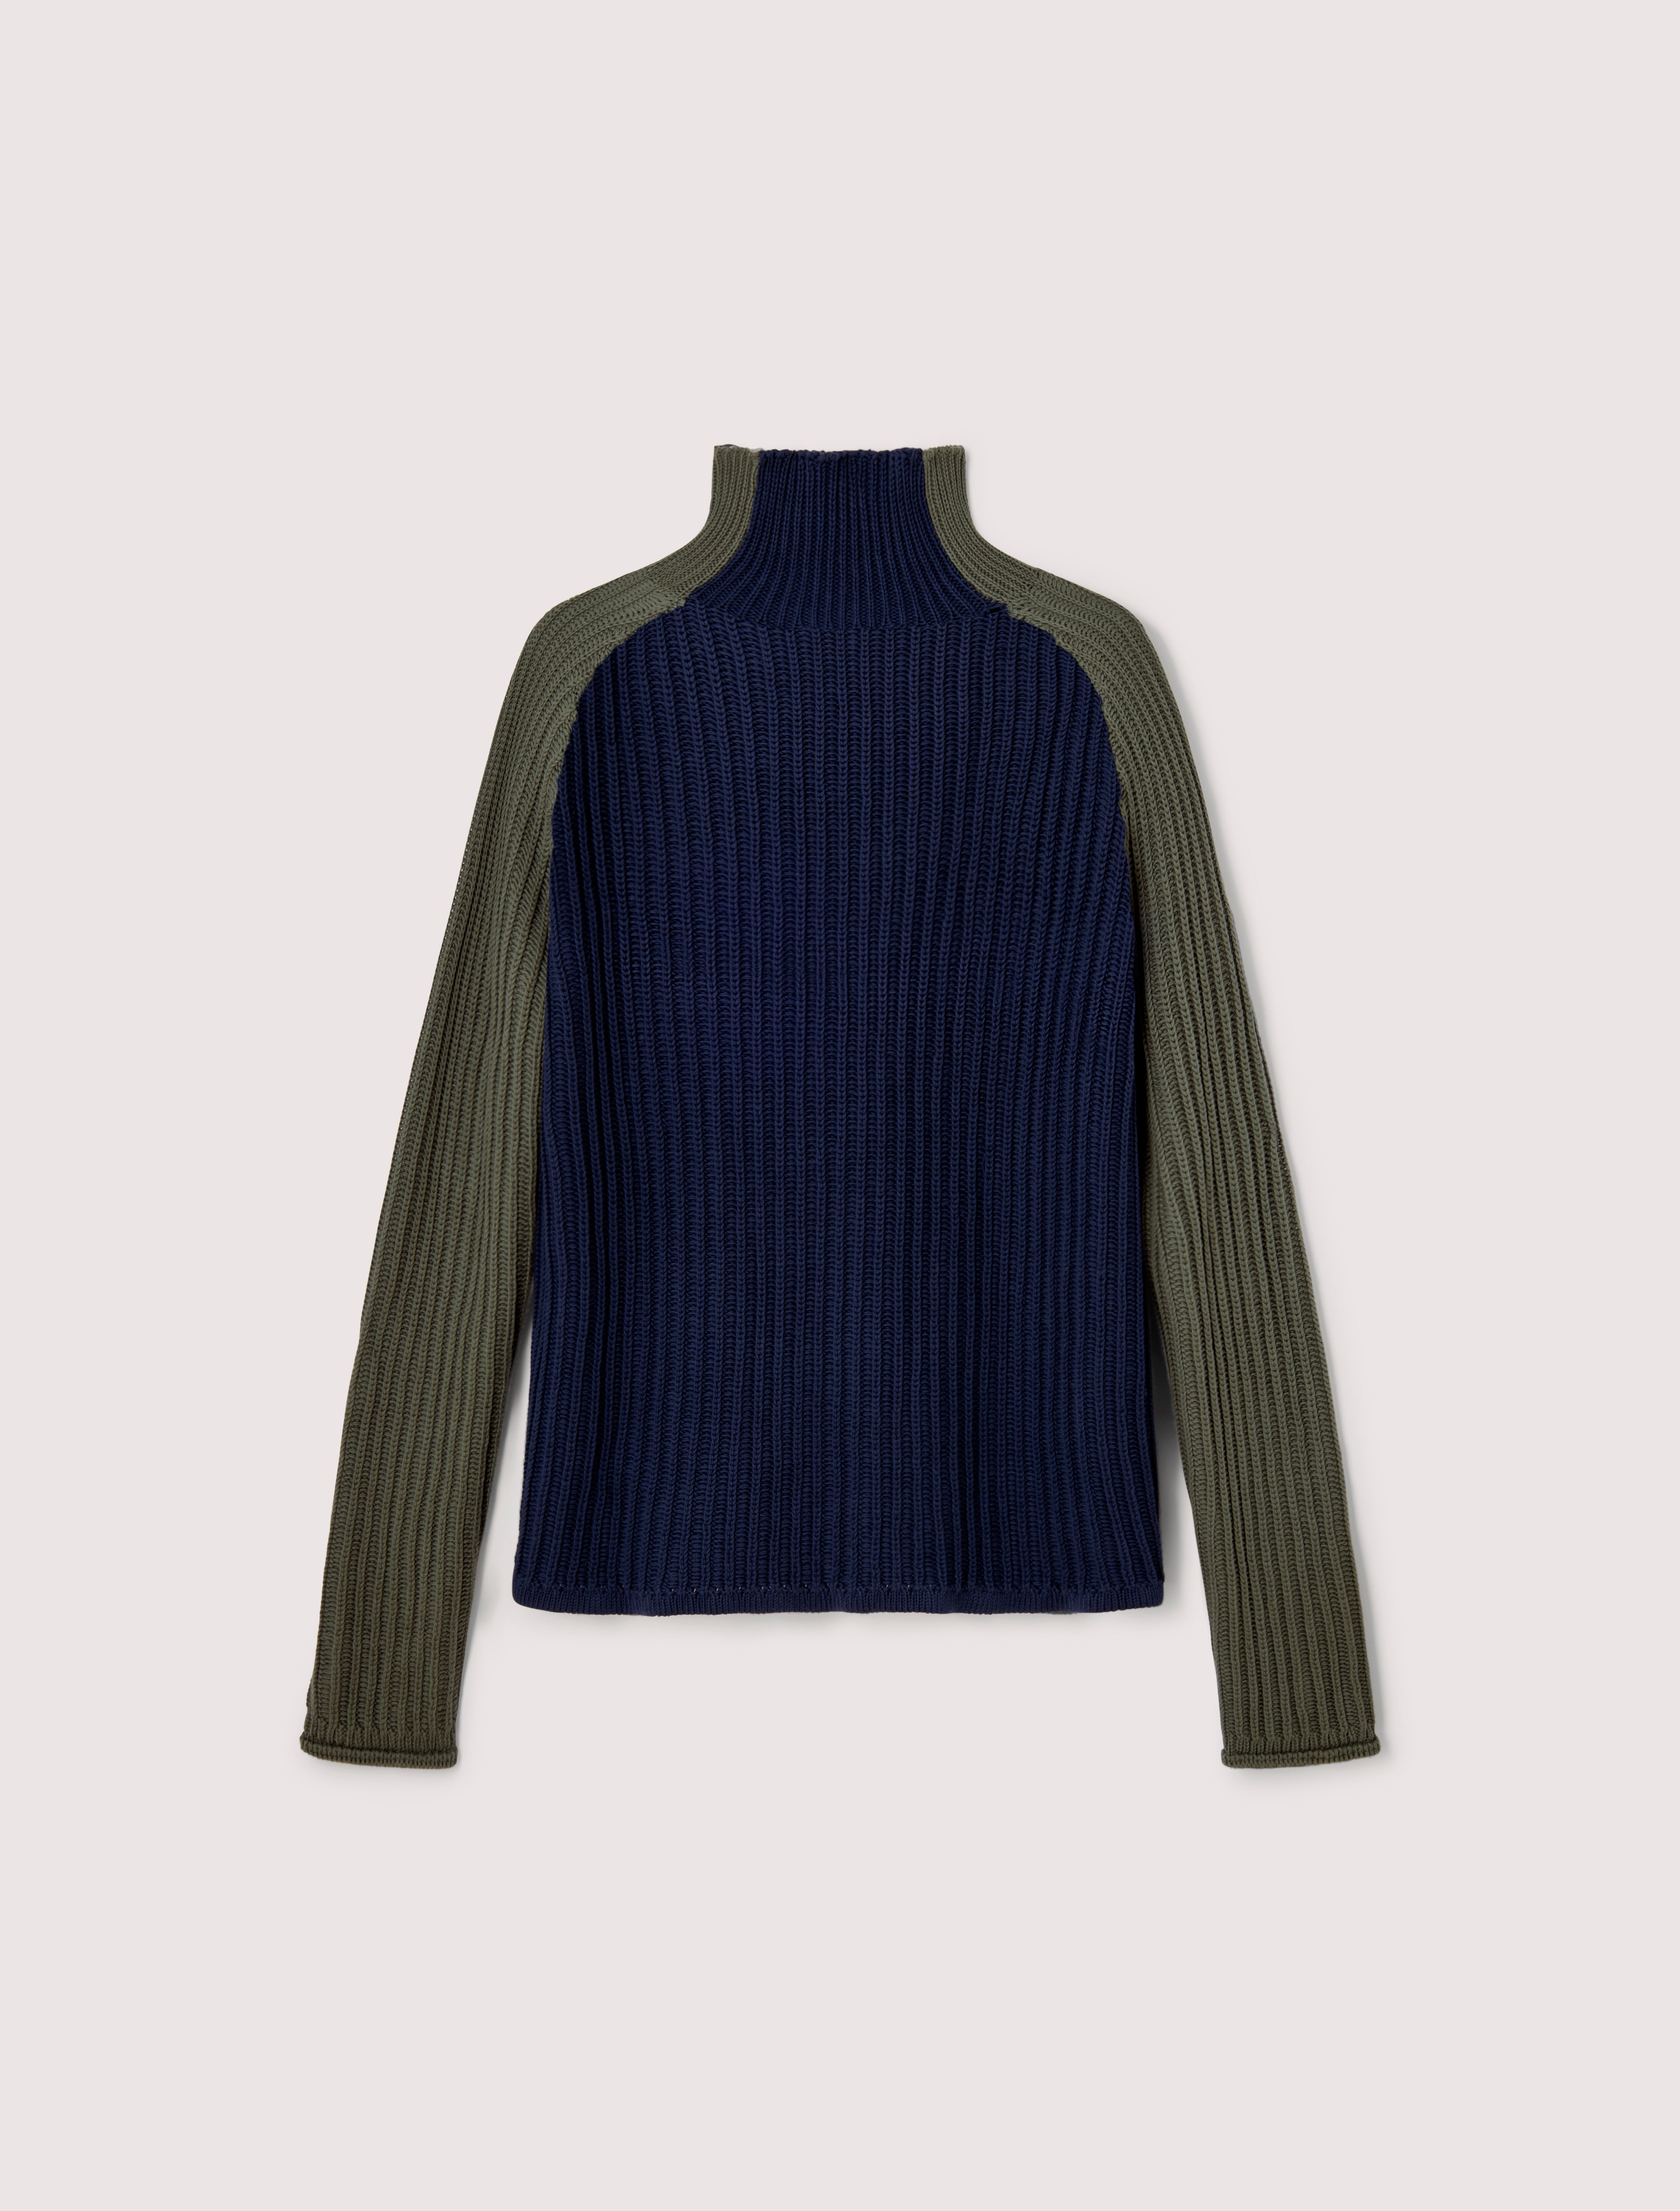 CARRER_REC KNITTED ZIP UP IN BLUE AND GREEN